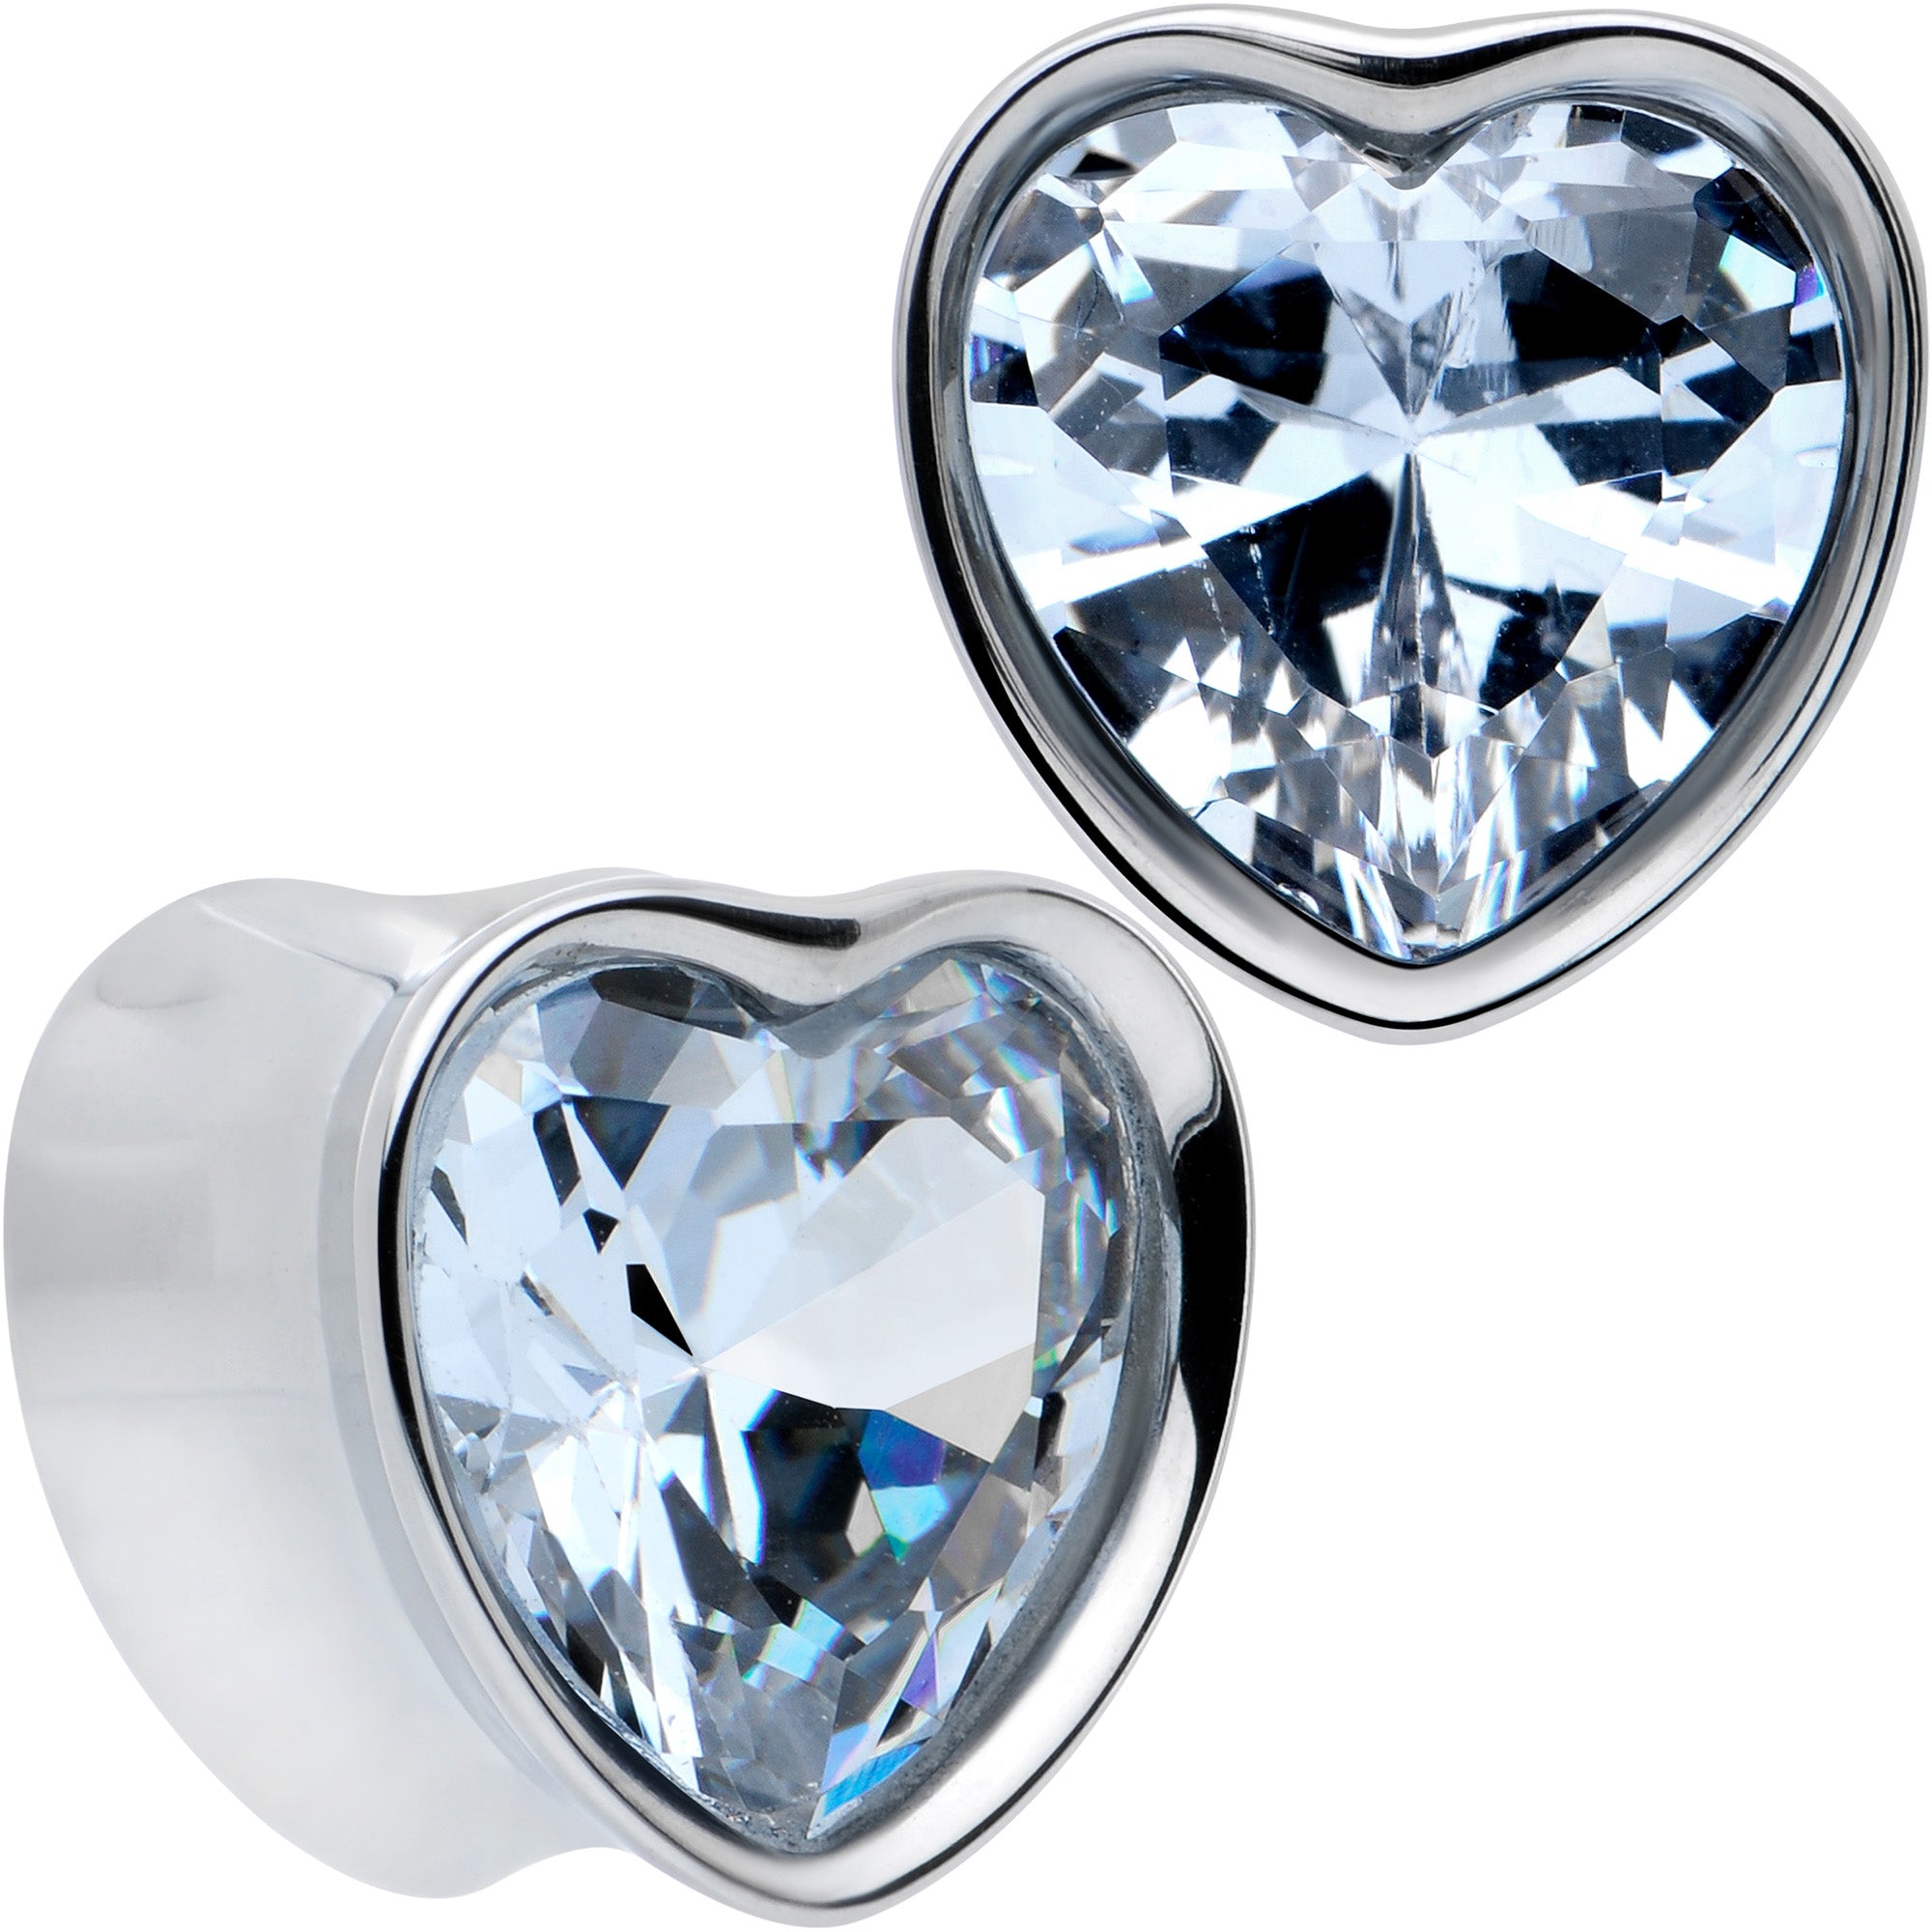 Stainless Steel CZ Gem Heart In Heart Double Flare Plug Set 8mm to 16mm